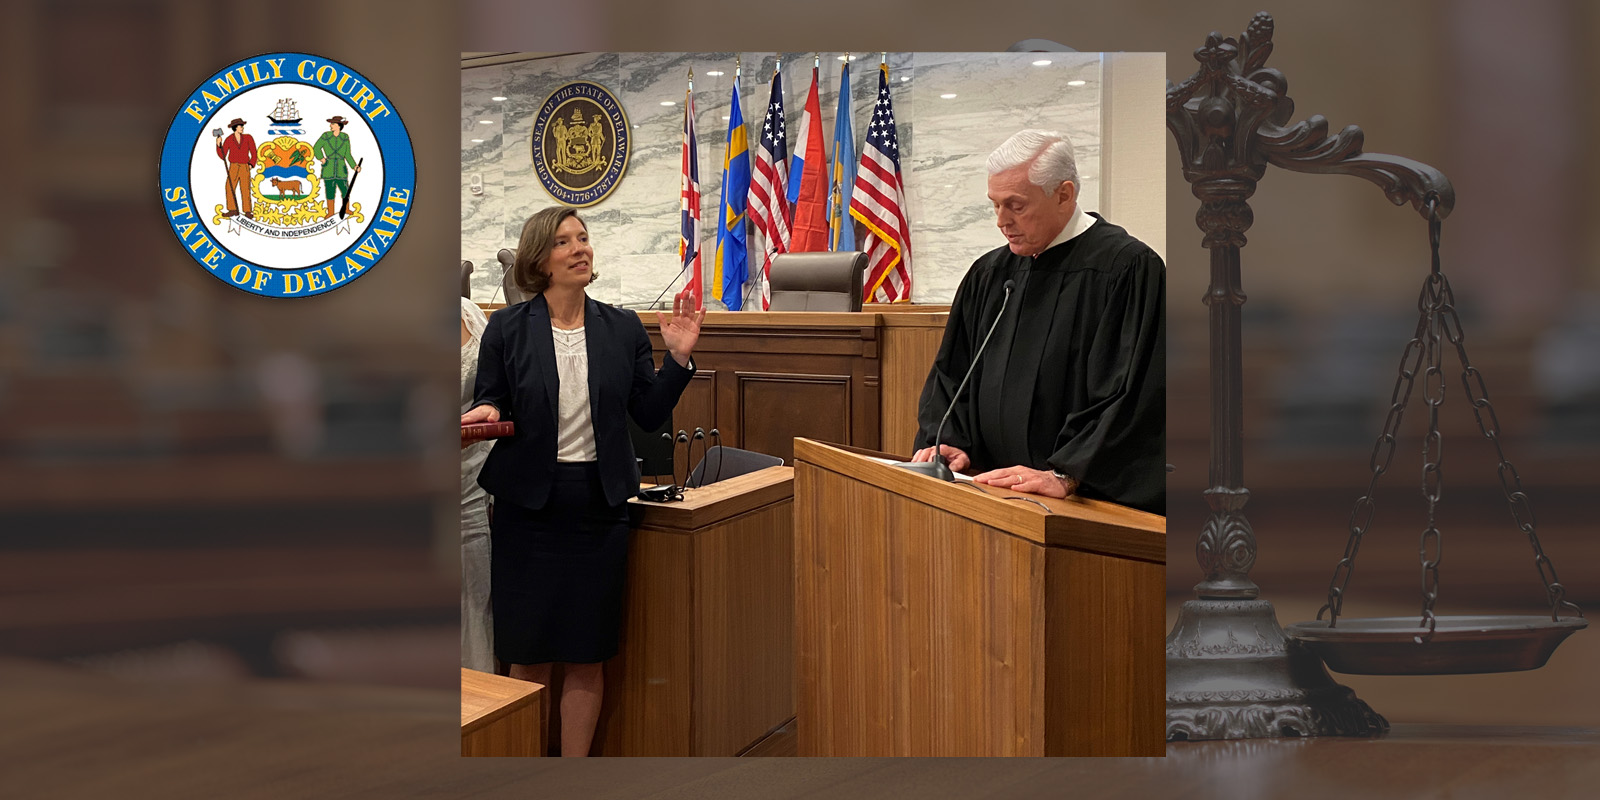 The Honorable Eliza M. Hirst takes the Oath of Office as a Judge for the Family Court